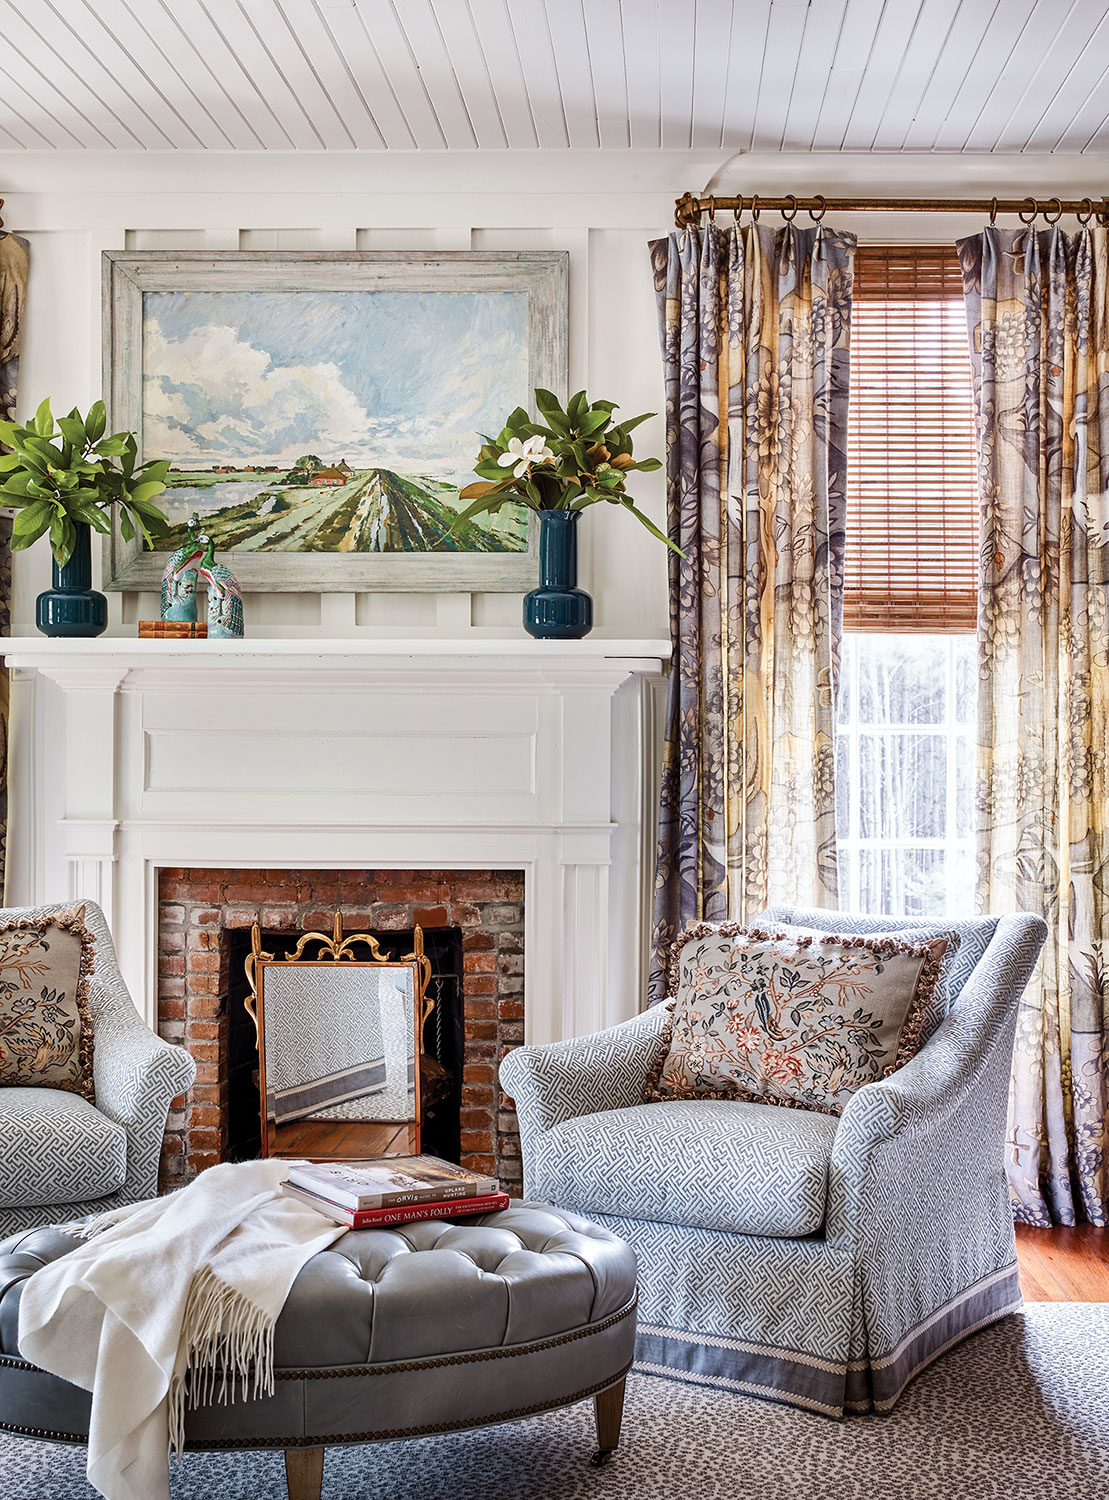 Photo of James Farmer interior design at McCurdy Plantation featuring two light blue armchairs and a round, tufted light blue leather ottoman. The walls, shiplap ceiling and mantel are all painted white.